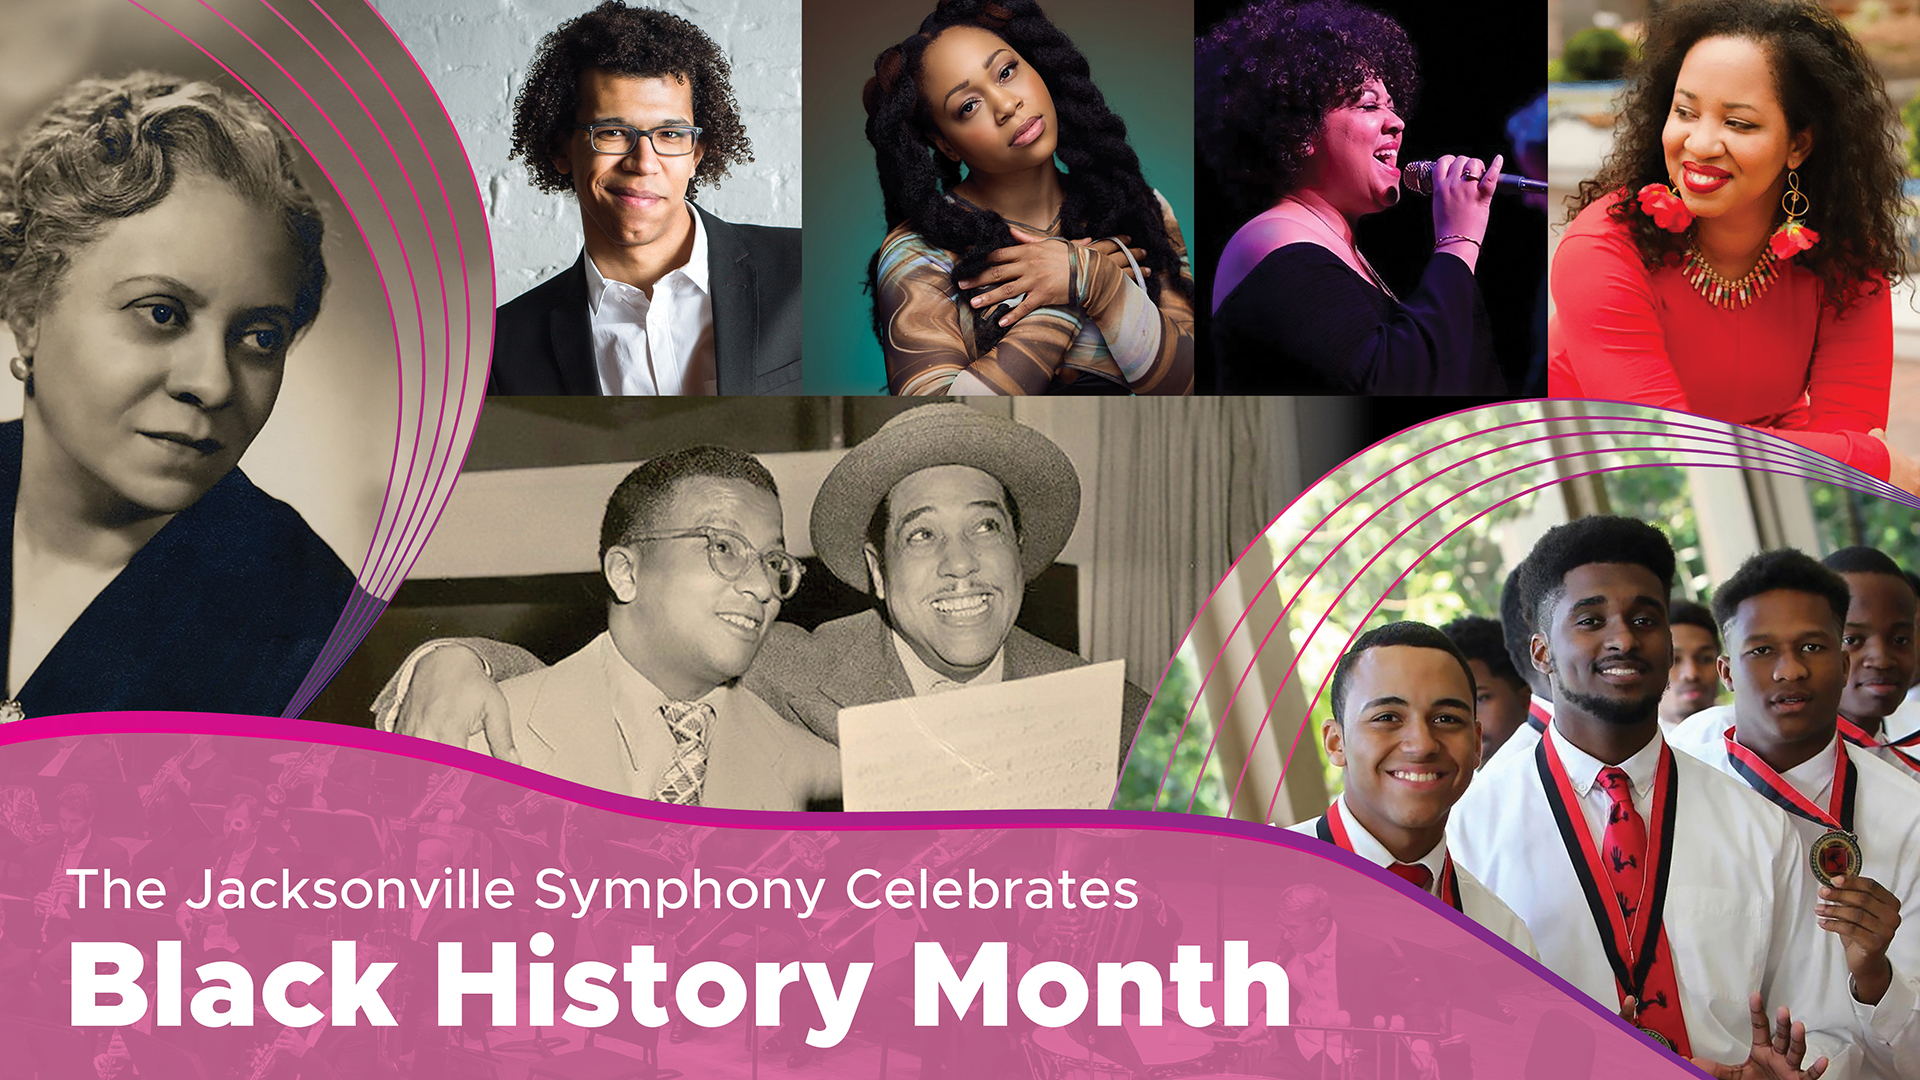 Featured image for “The Jacksonville Symphony Celebrates Black History Month”